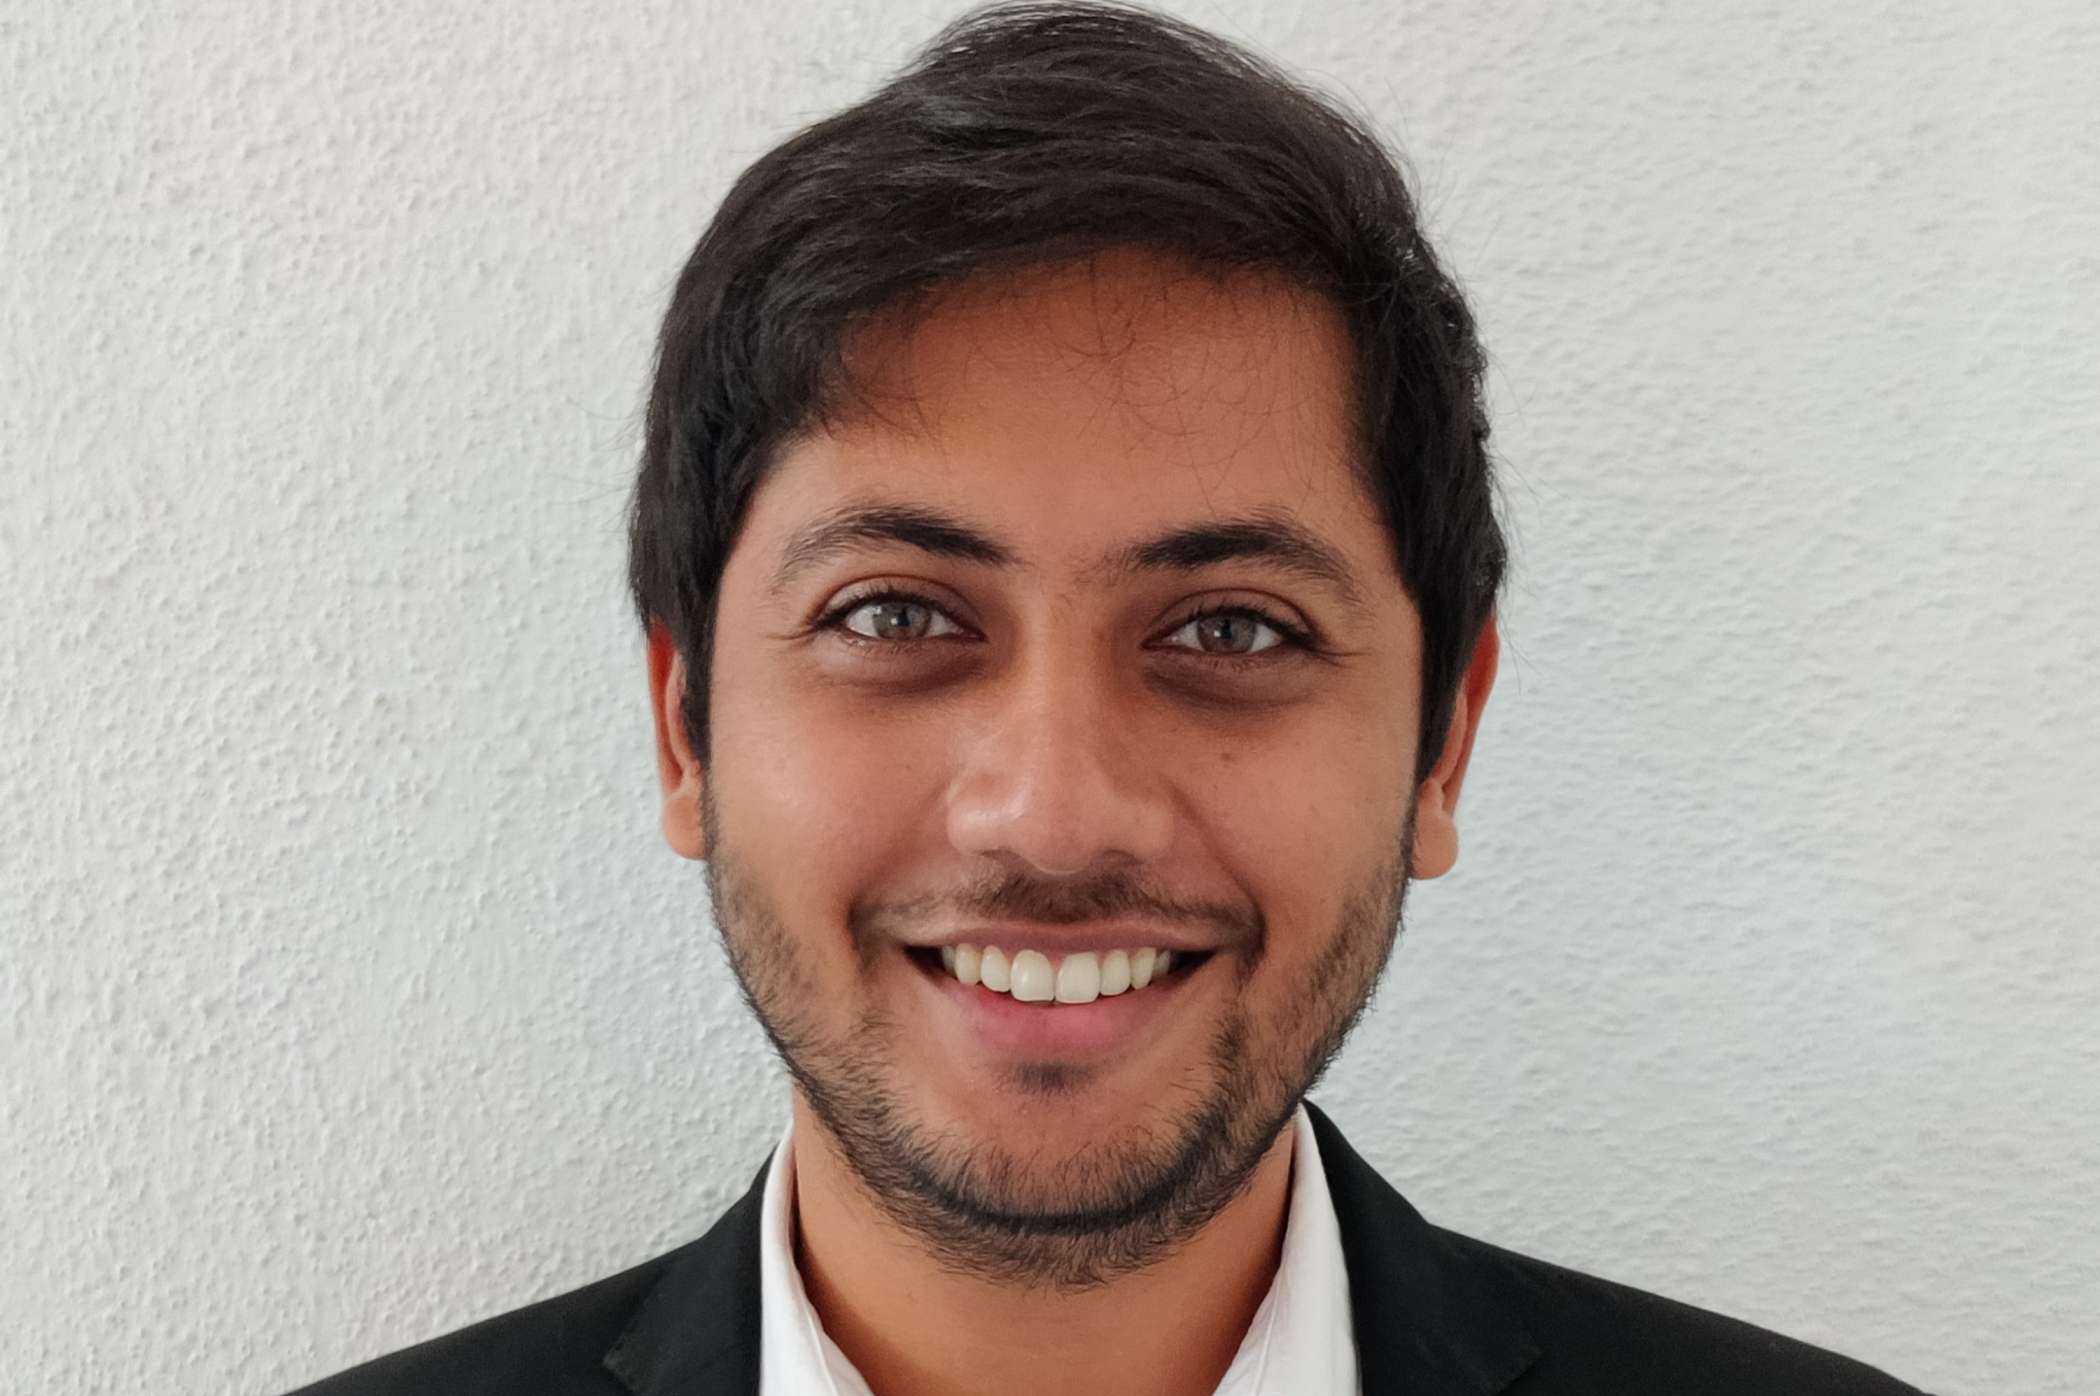 Meet the manager: Sagar Lele’s journey to bring institutional-grade experience to modern retail investors